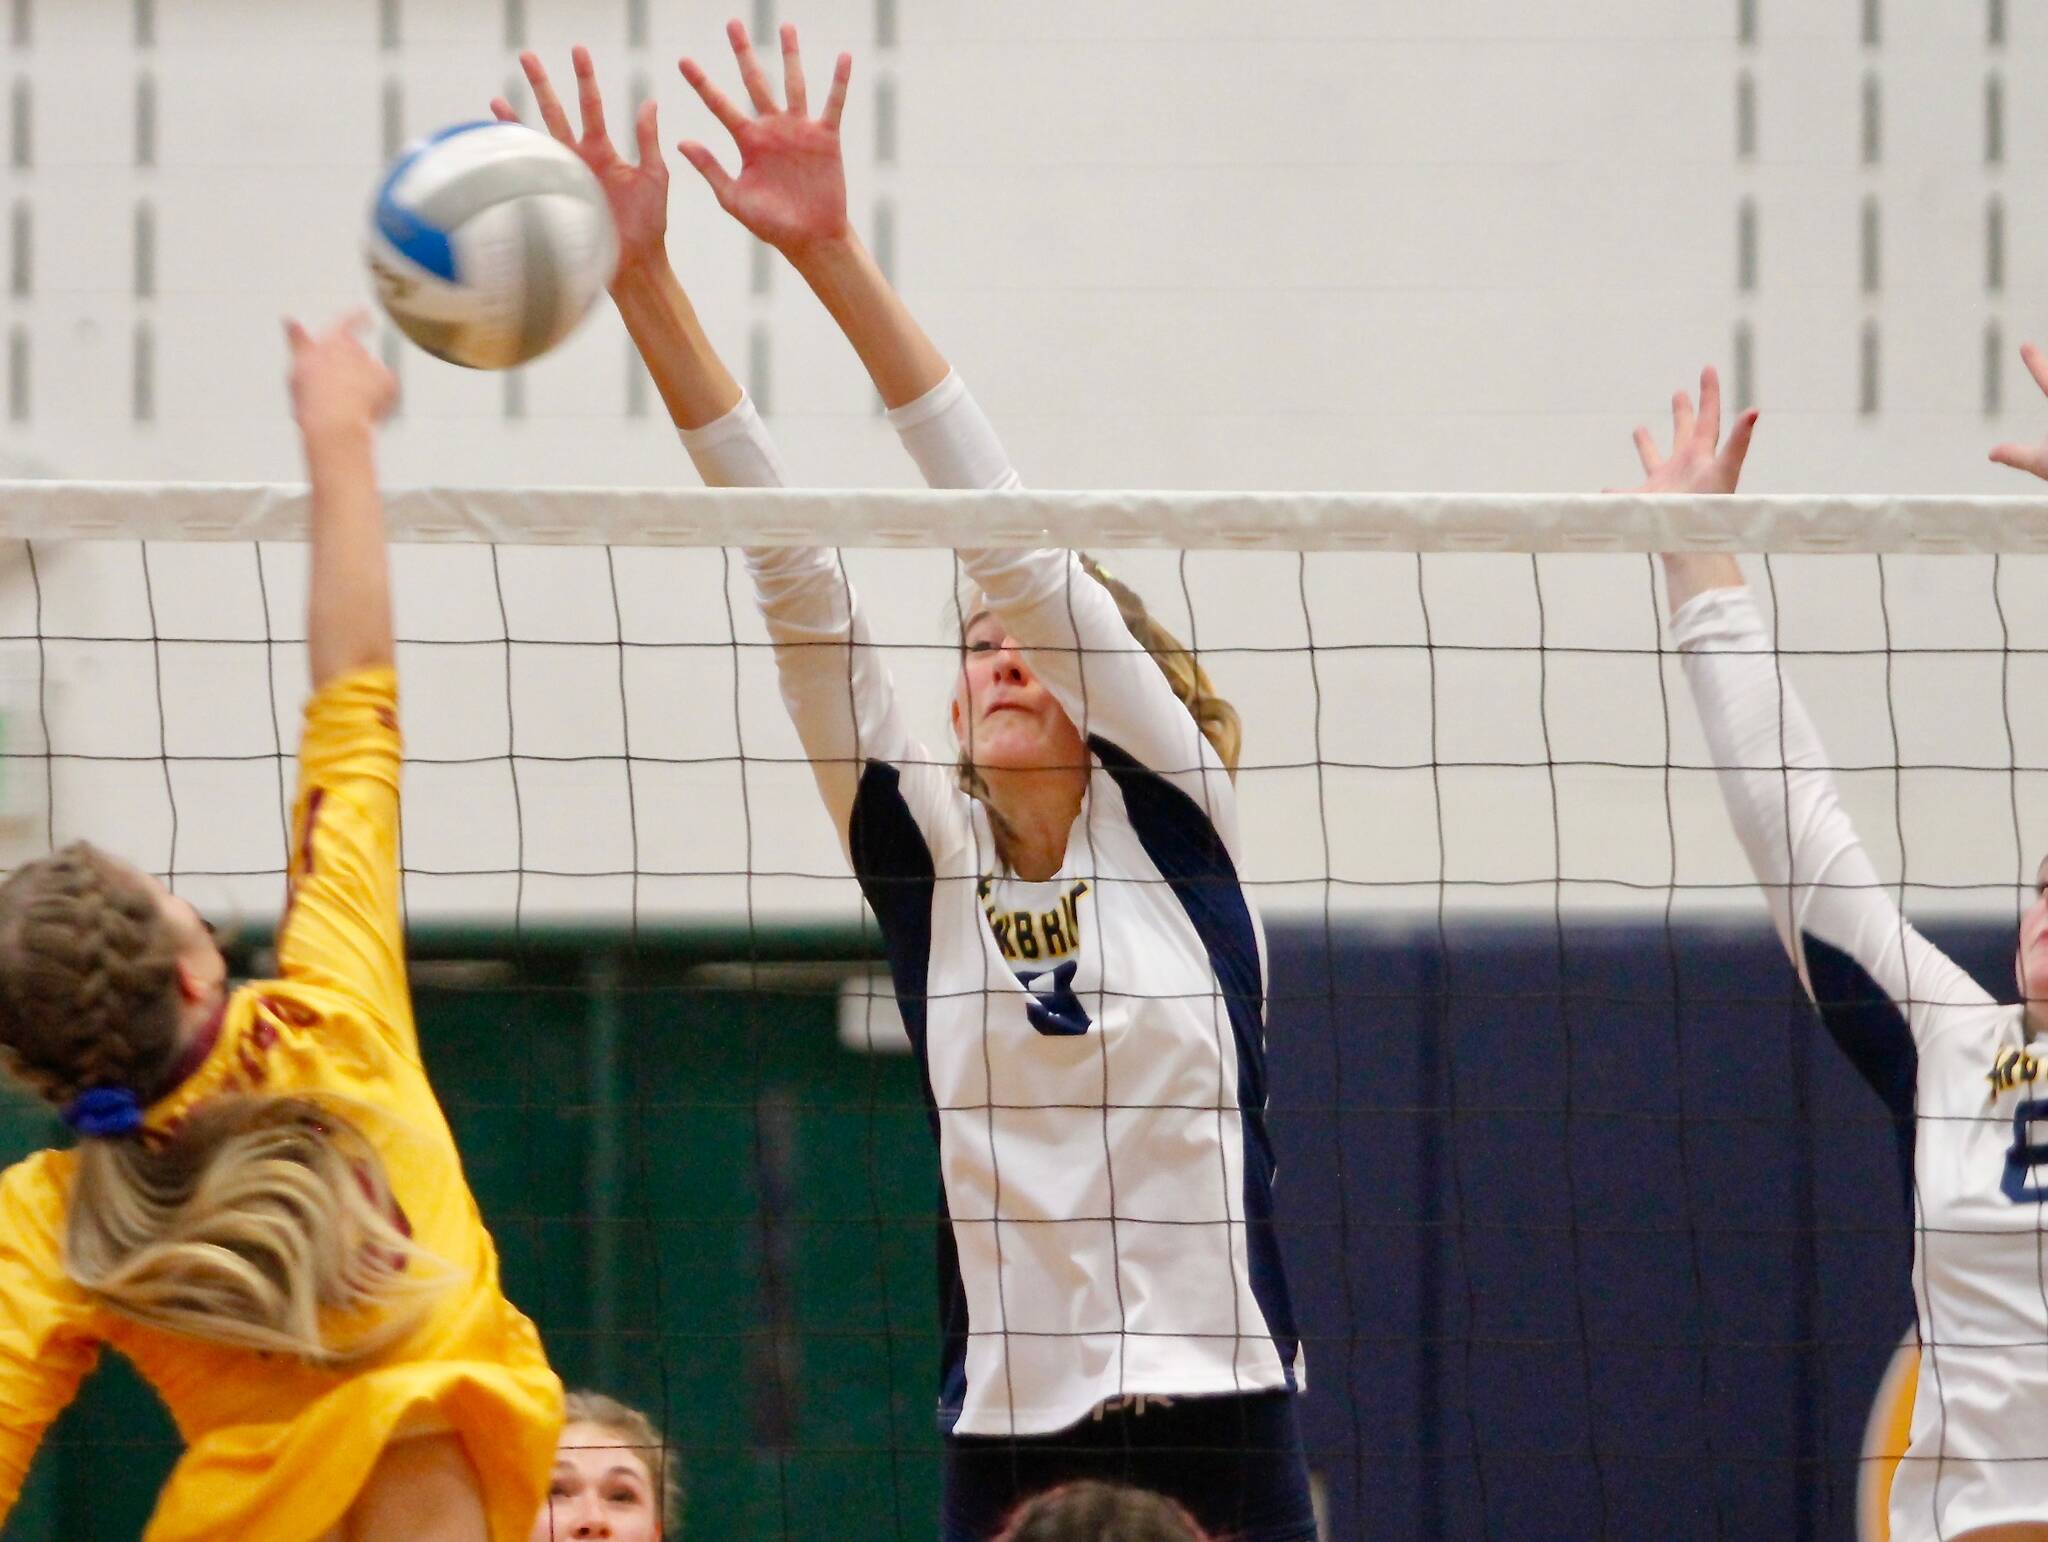 Bainbridge middle blocker Holley McFadden gets in the way of a Kingston shot during her team’s victory over the Bucs on Thursday. (Mark Krulish/Kitsap News Group)